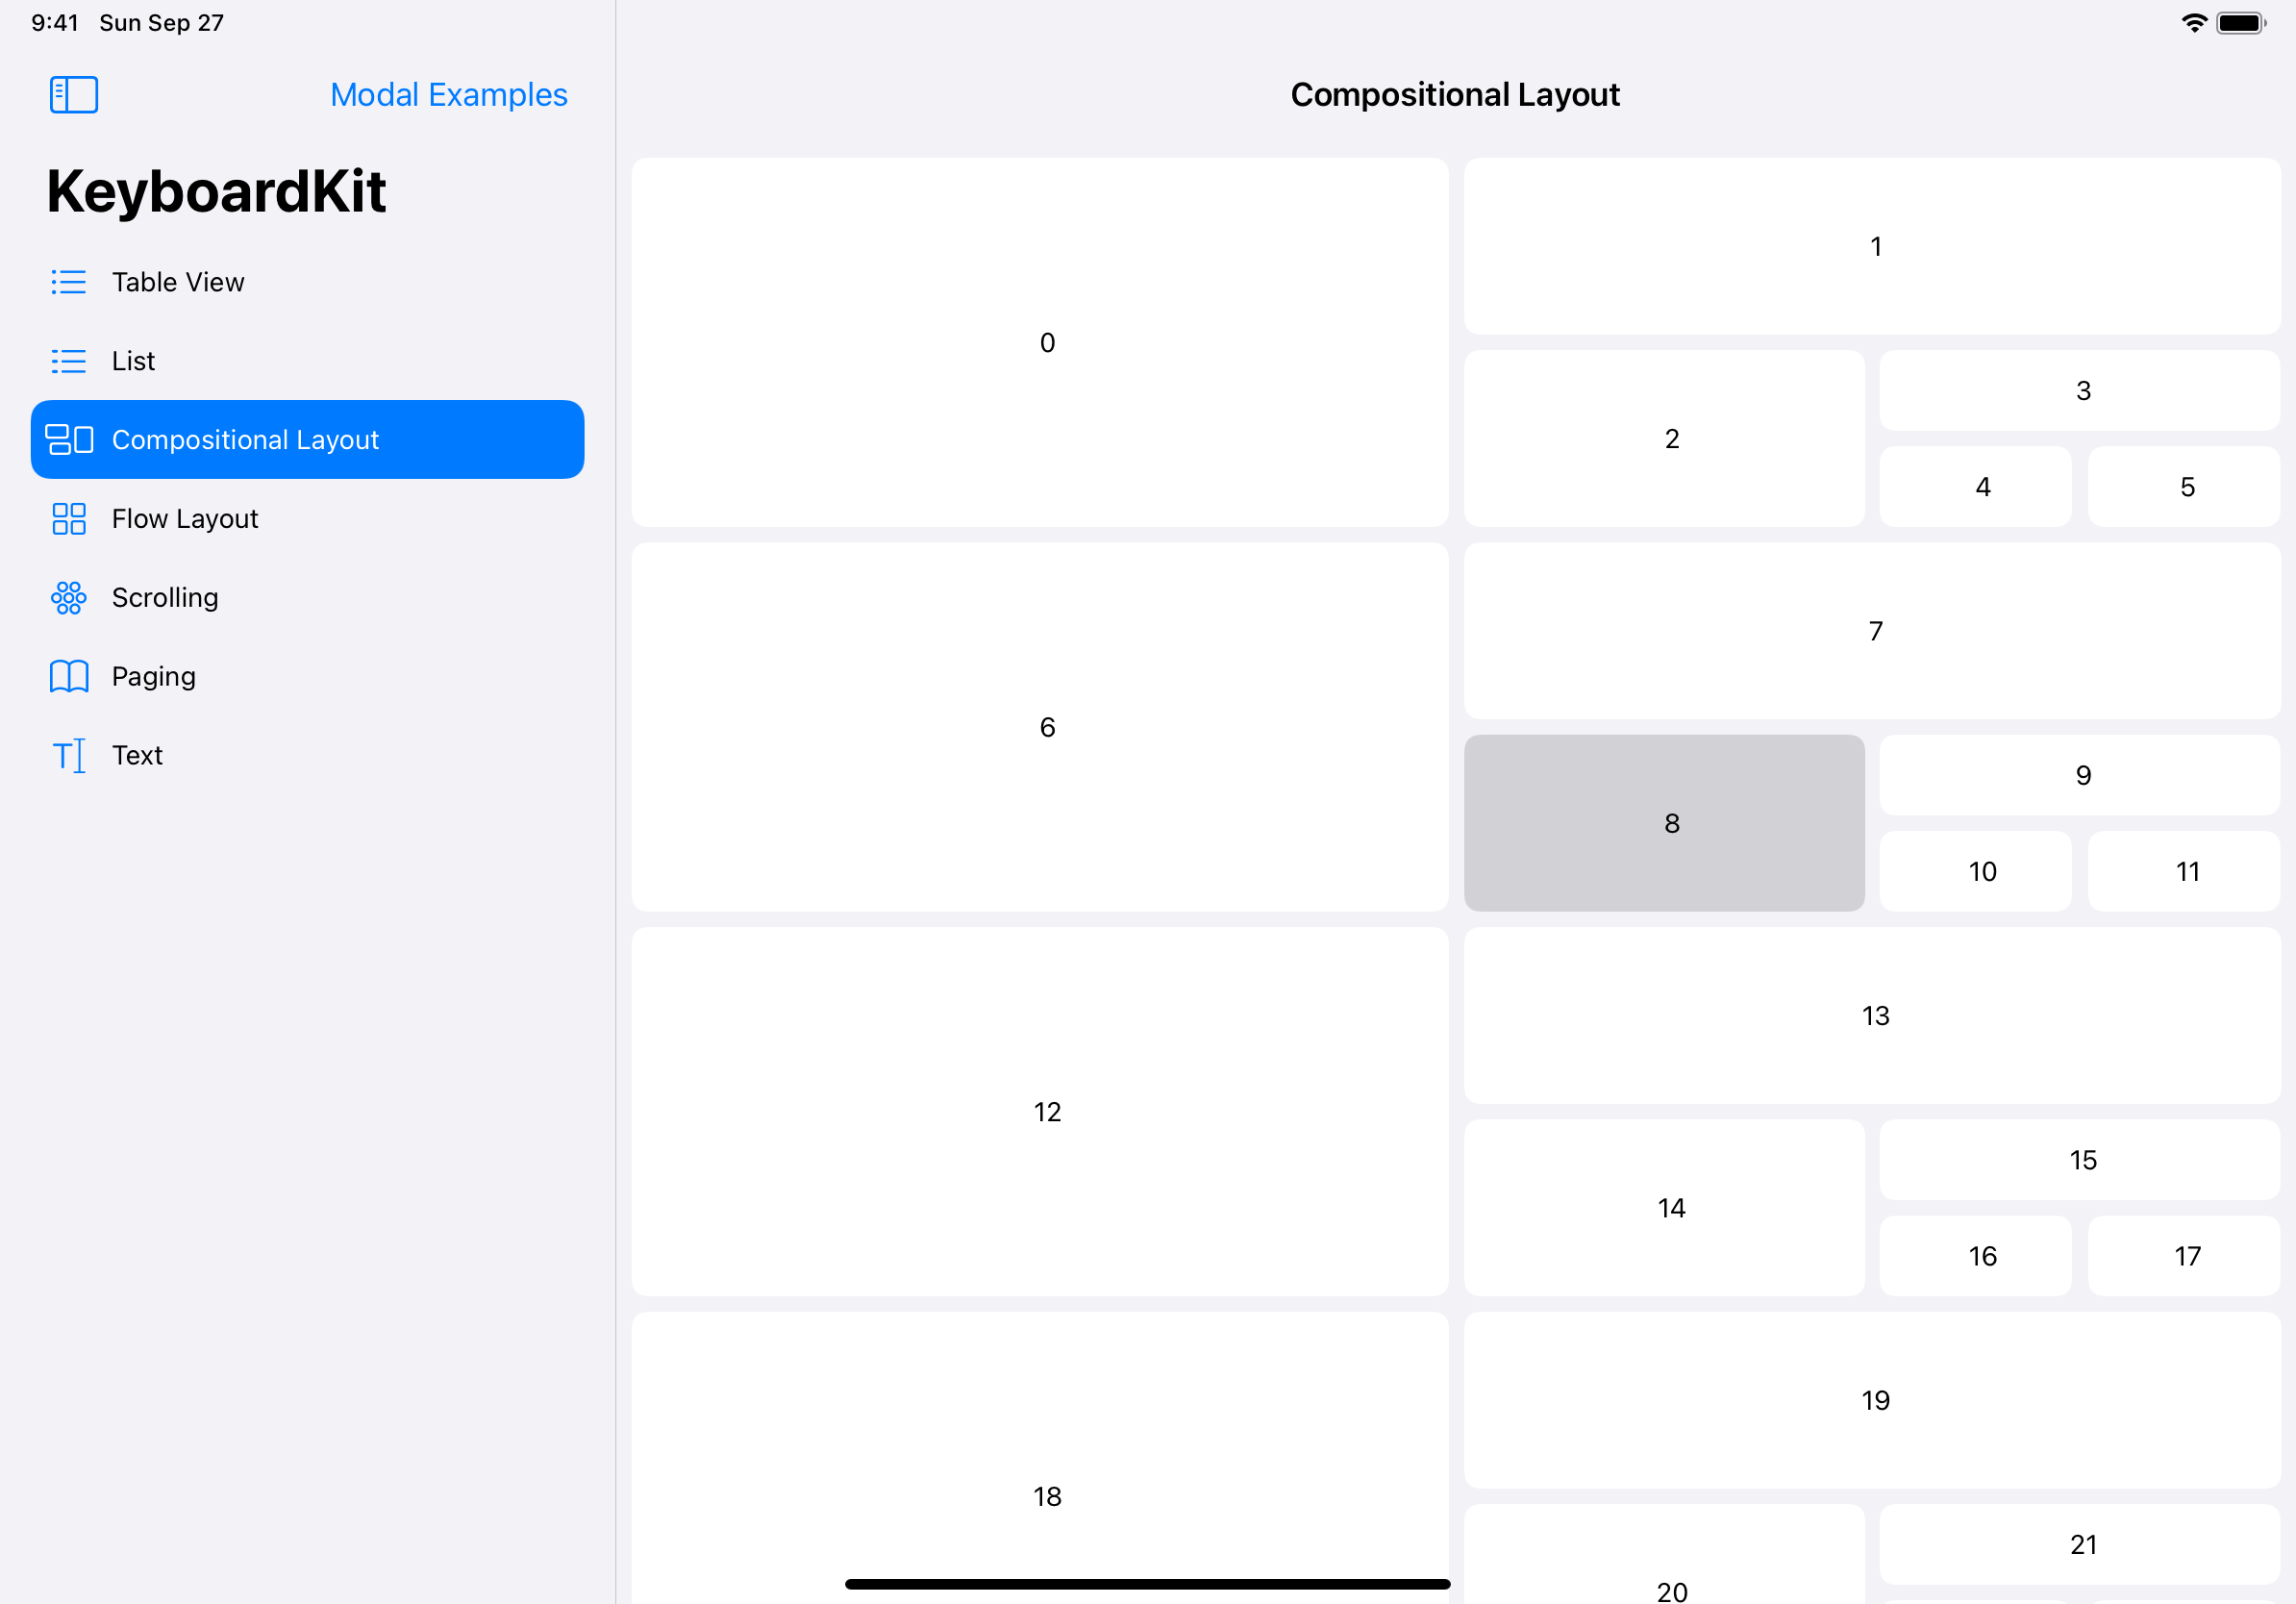 iPad screenshot showing a sidebar on the left with the title ‘KeyboardKit’ above the items: ‘Table View’, ‘List’, ‘Compositional Layout’, ‘Flow Layout’, ‘Scrolling’, ‘Paging’, and ‘Text’. On the right there is a grid of variable sized rectangles containing numbers.